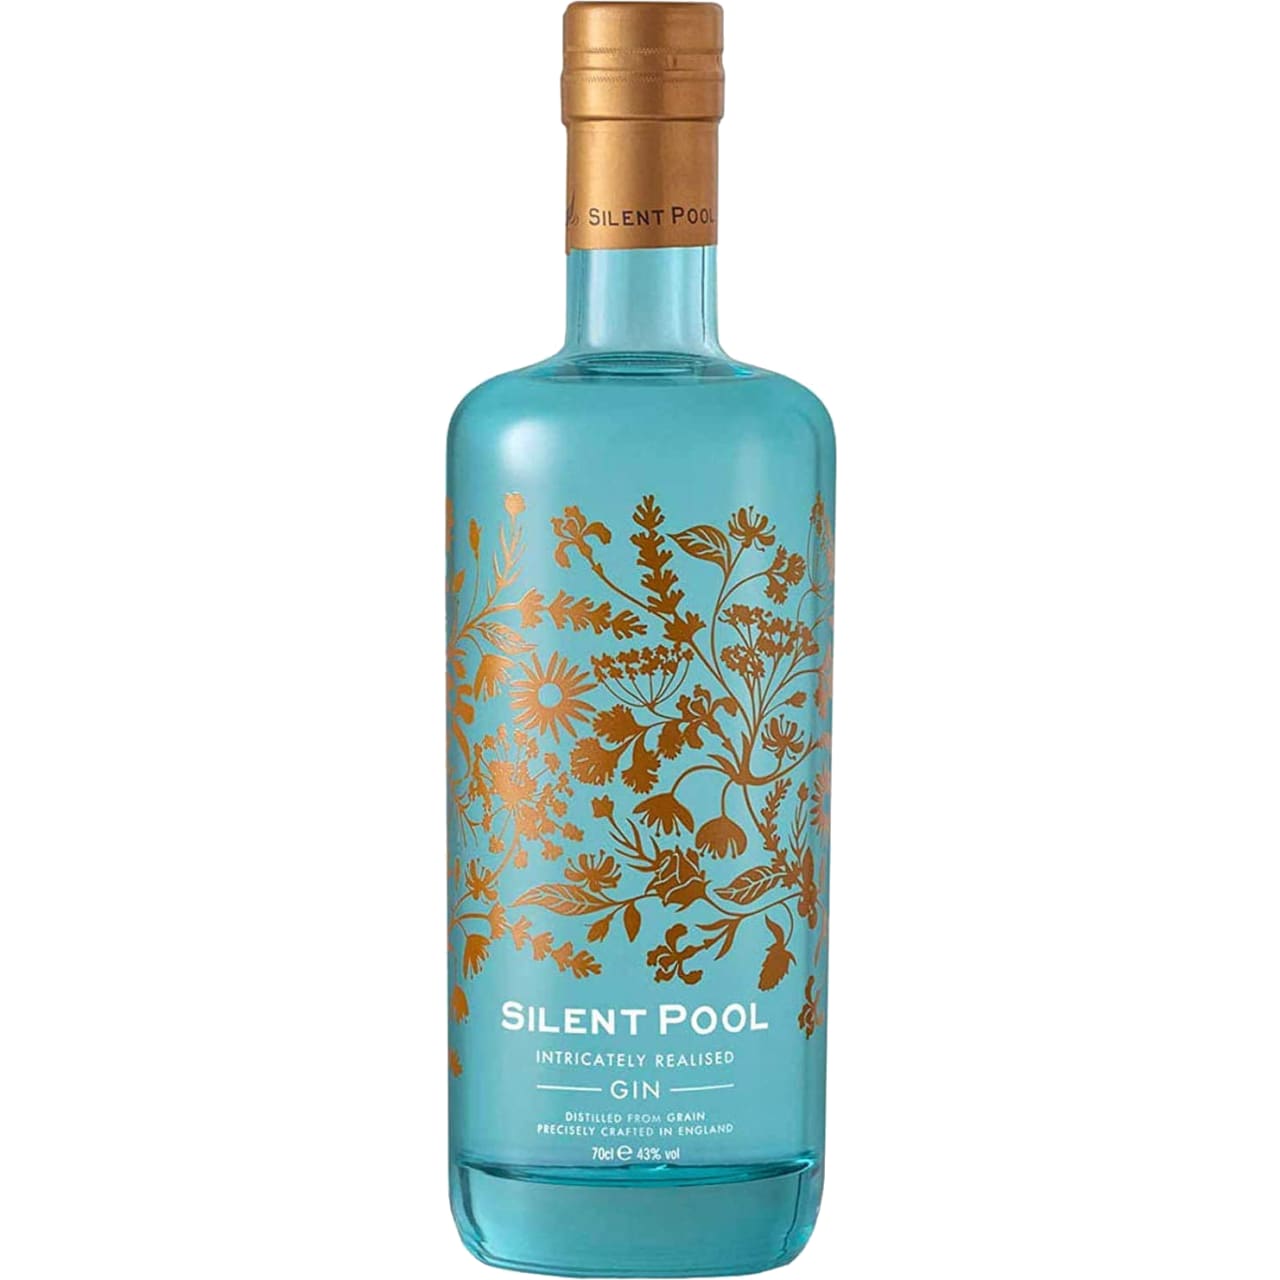 A crisp clean gin with layers of flavour; juniper married with rich notes of lavender, honey and kaffir lime.